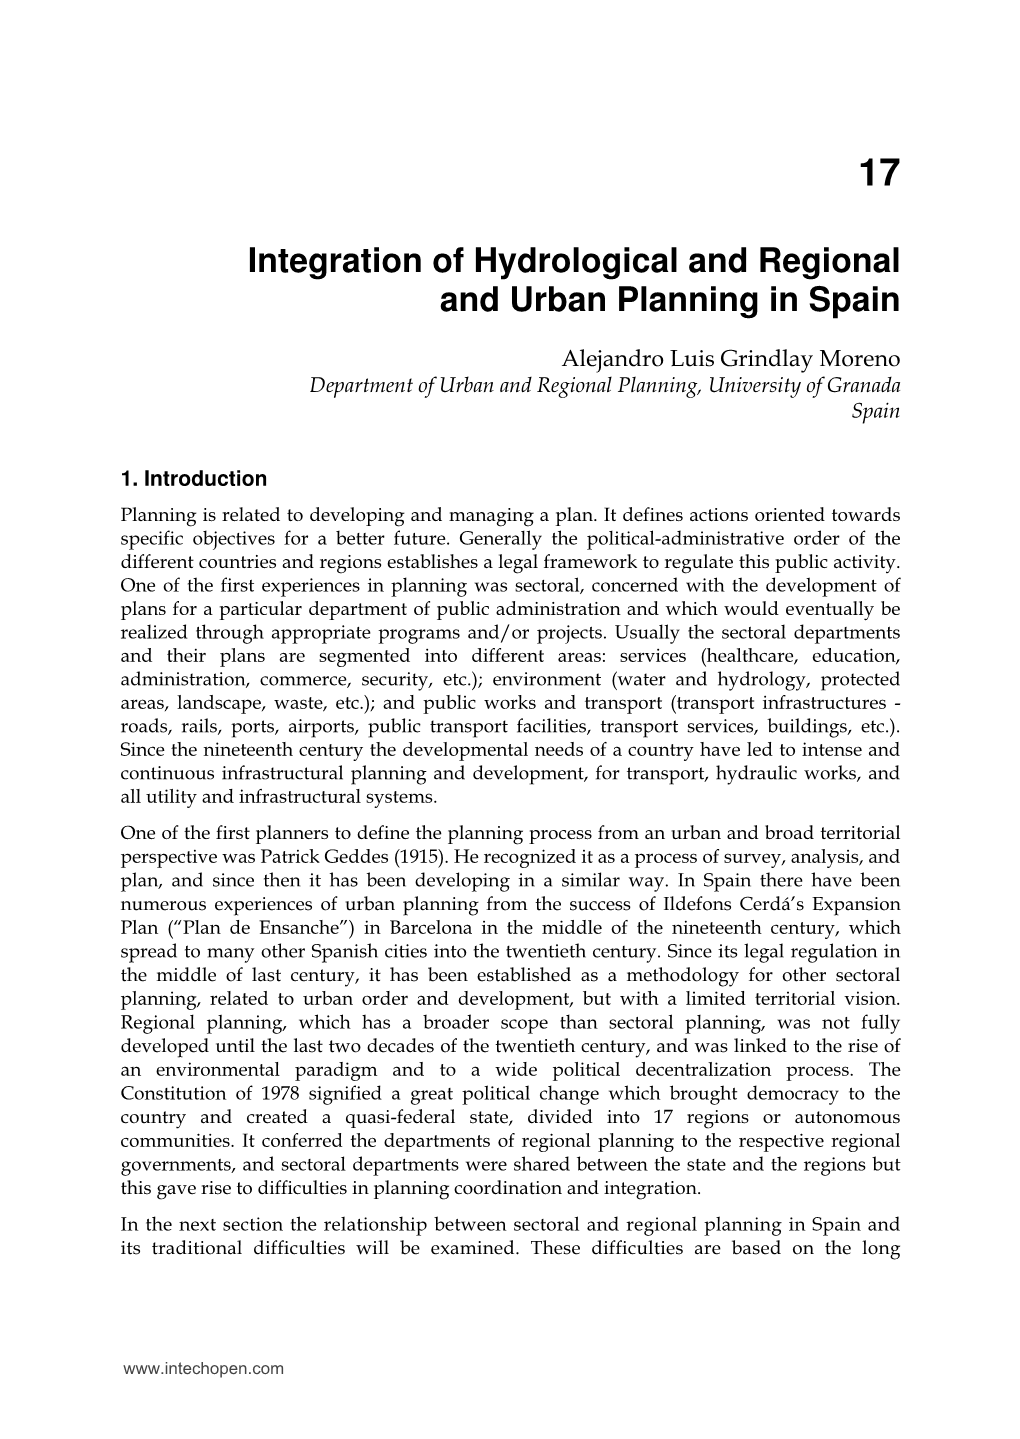 Integration of Hydrological and Regional and Urban Planning in Spain